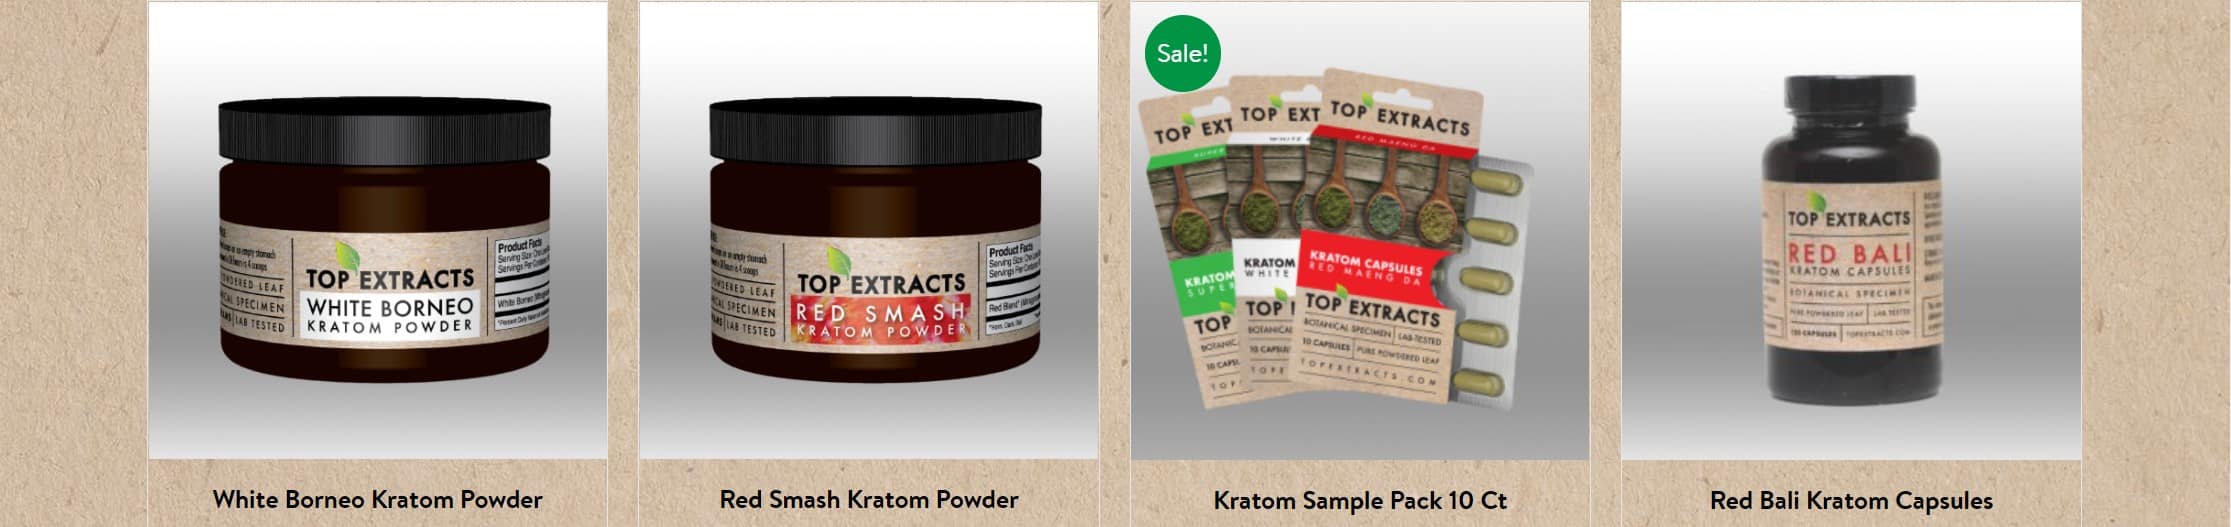 image of top extracts product review